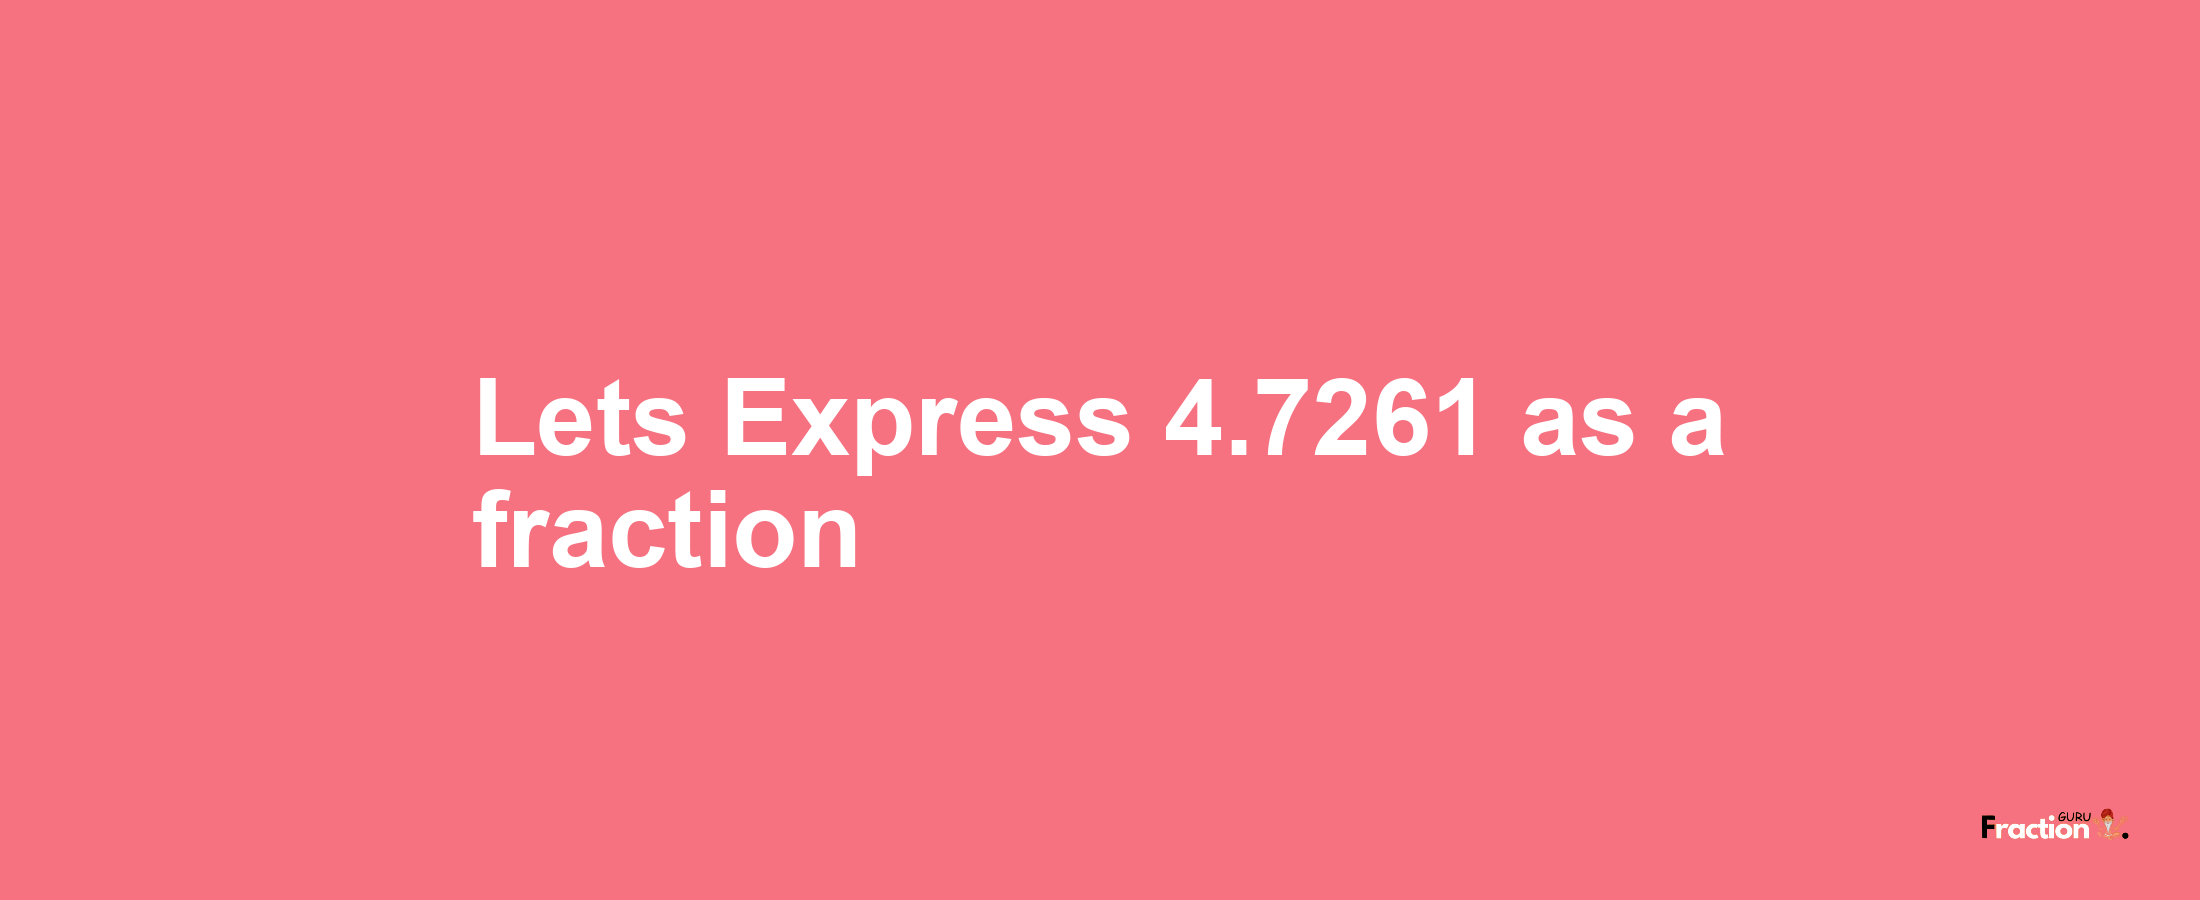 Lets Express 4.7261 as afraction